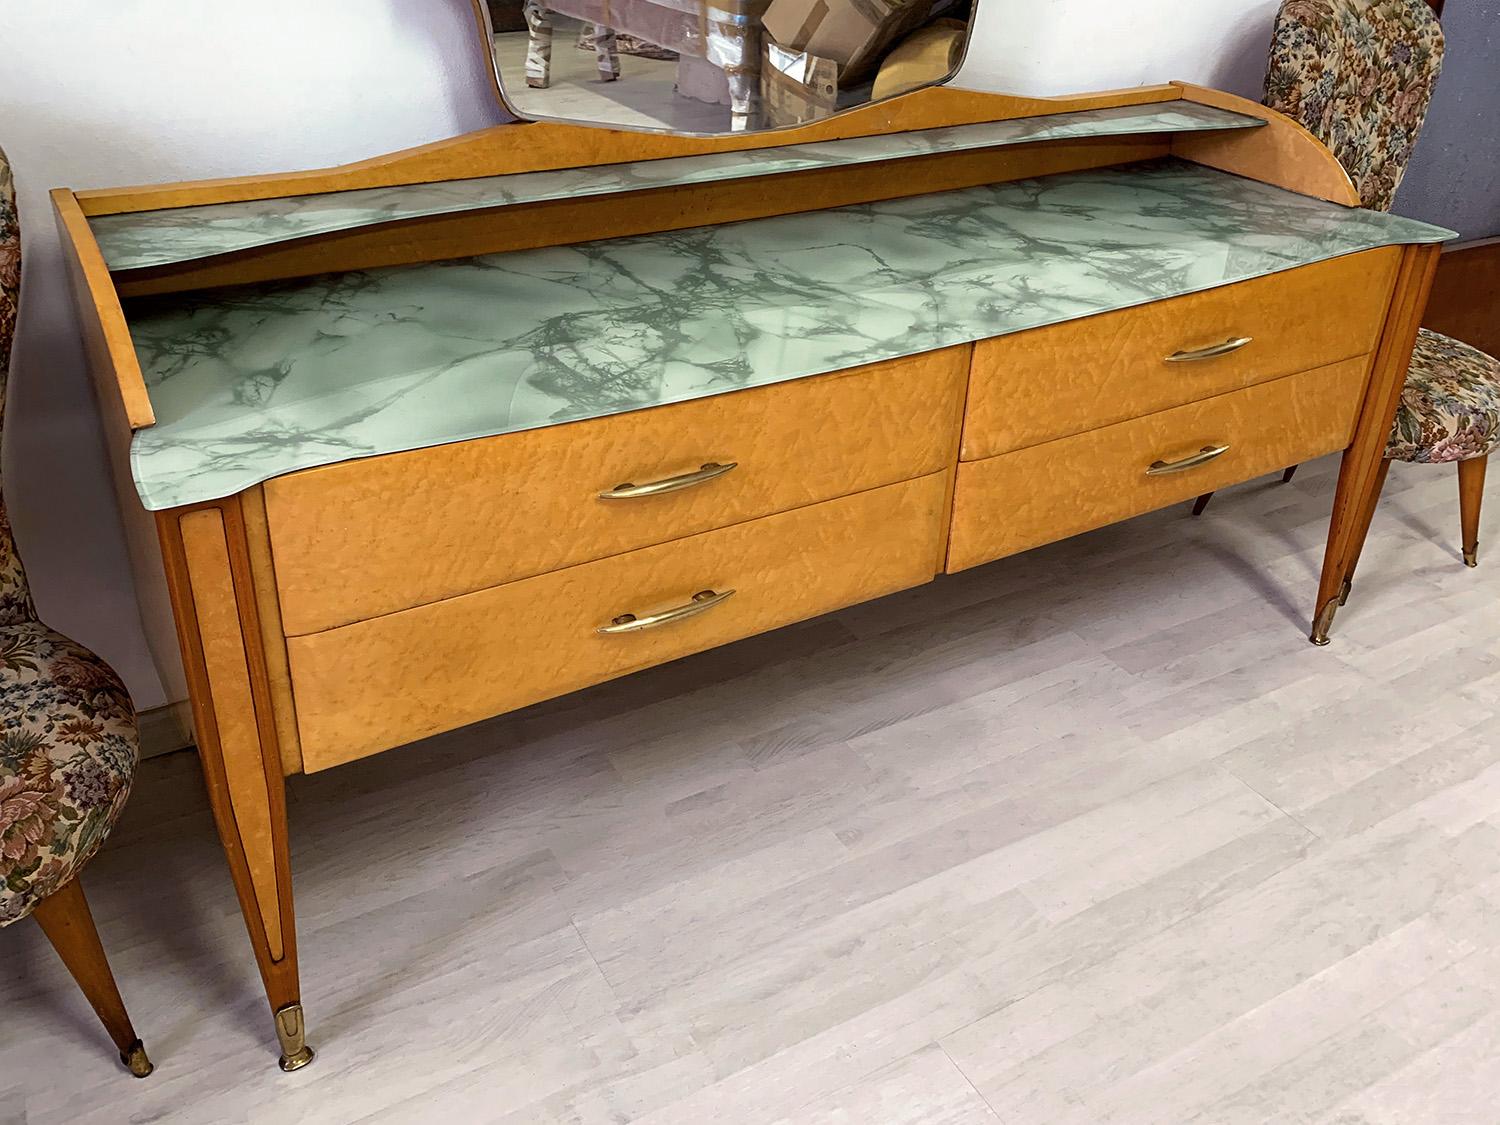 Italian Mid-Century Chest of Drawers with Mirror Gio Ponti Style, 1950's For Sale 9